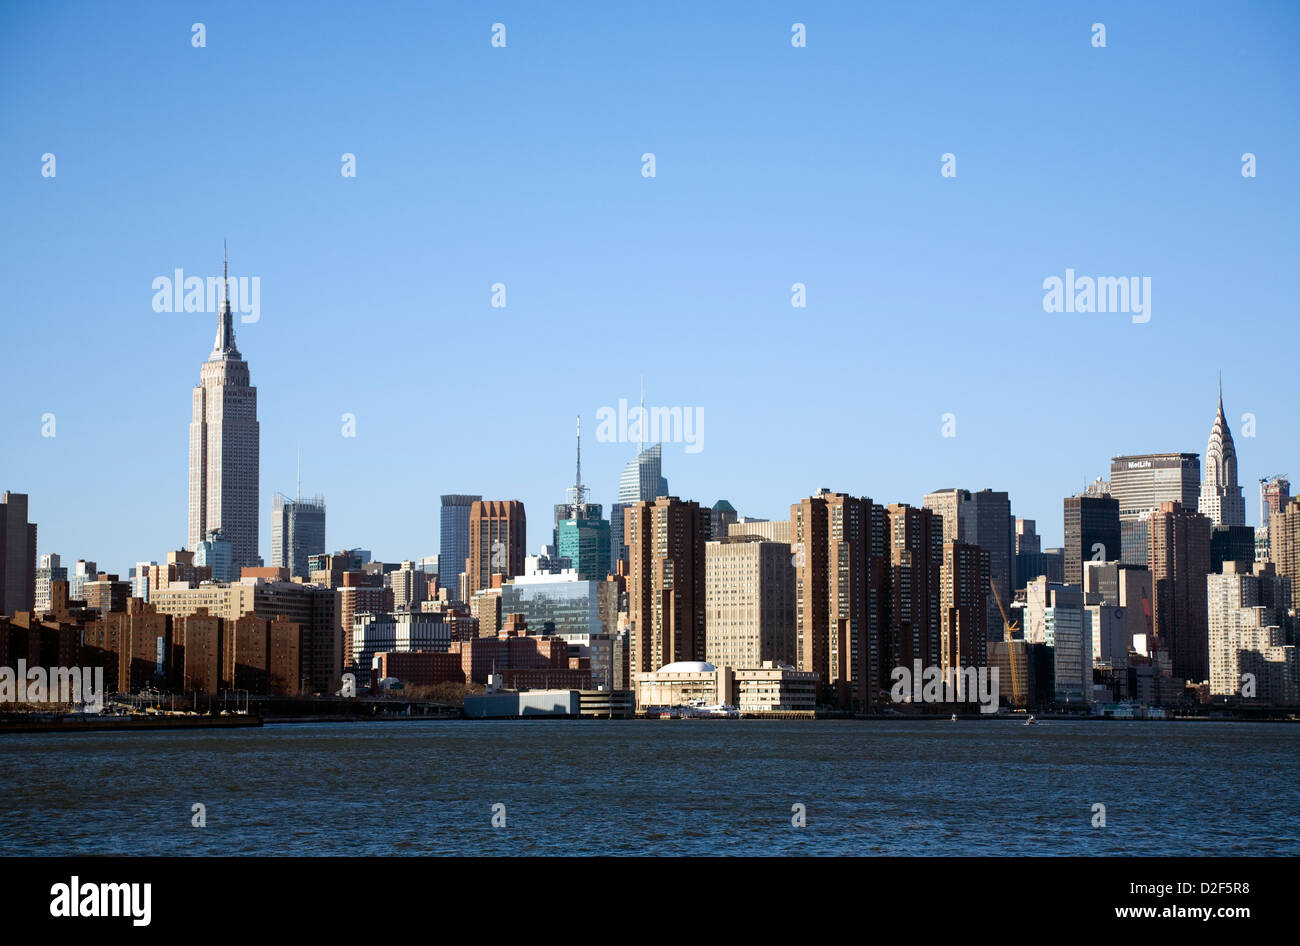 Manhattan skyline, including Empire State Building, Chrysler Building, Met Life and East River, New York, NY, USA Stock Photo